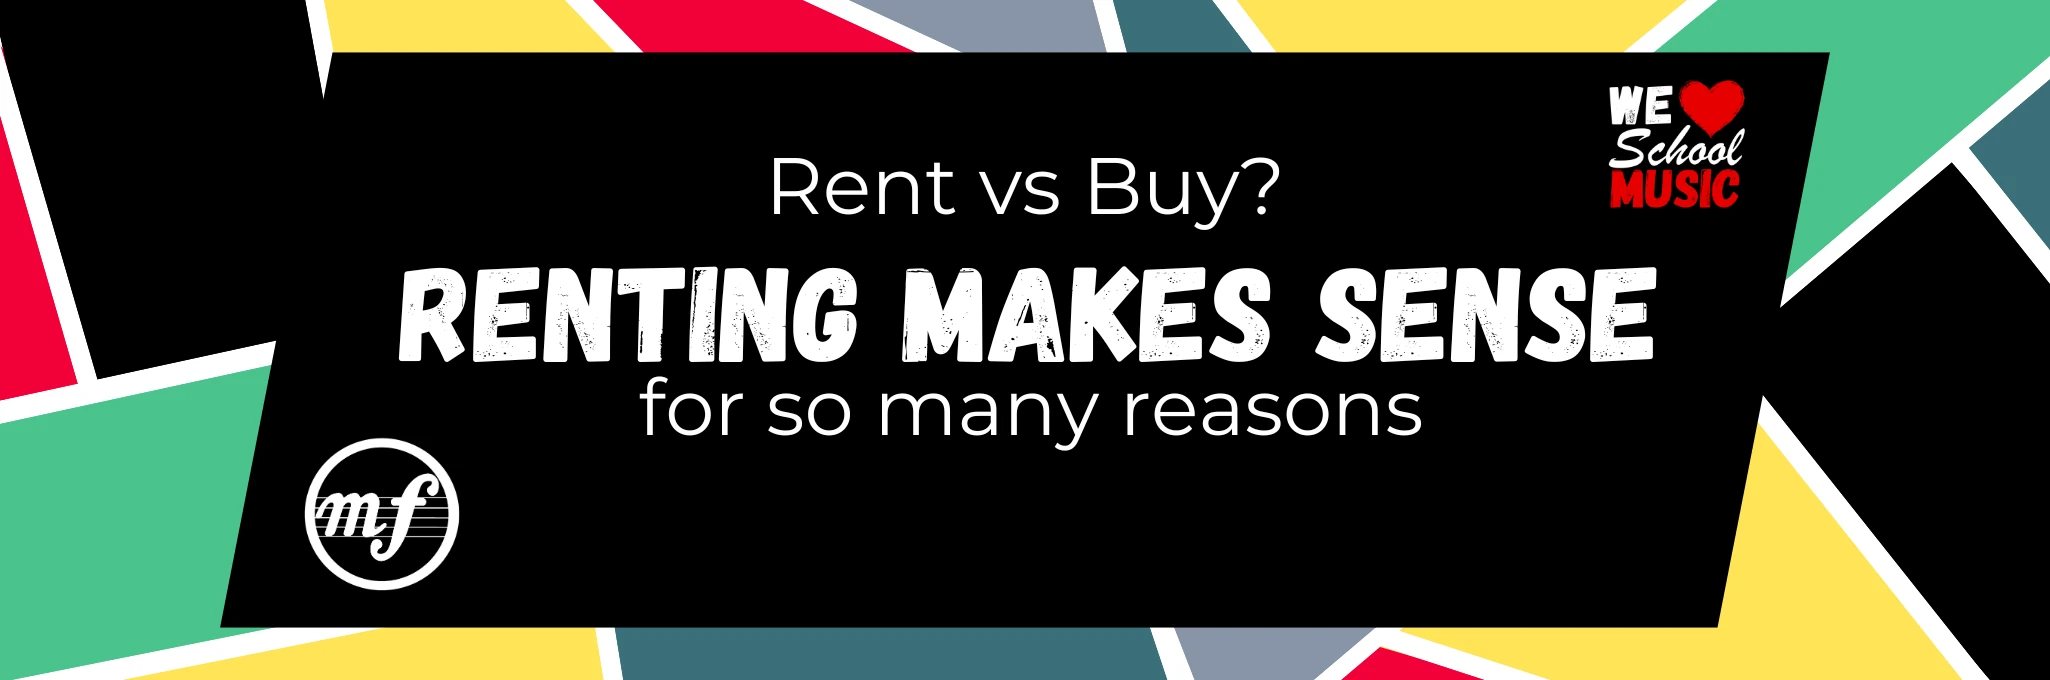  Renting vs buying a musical instrument makes sense for many reasons